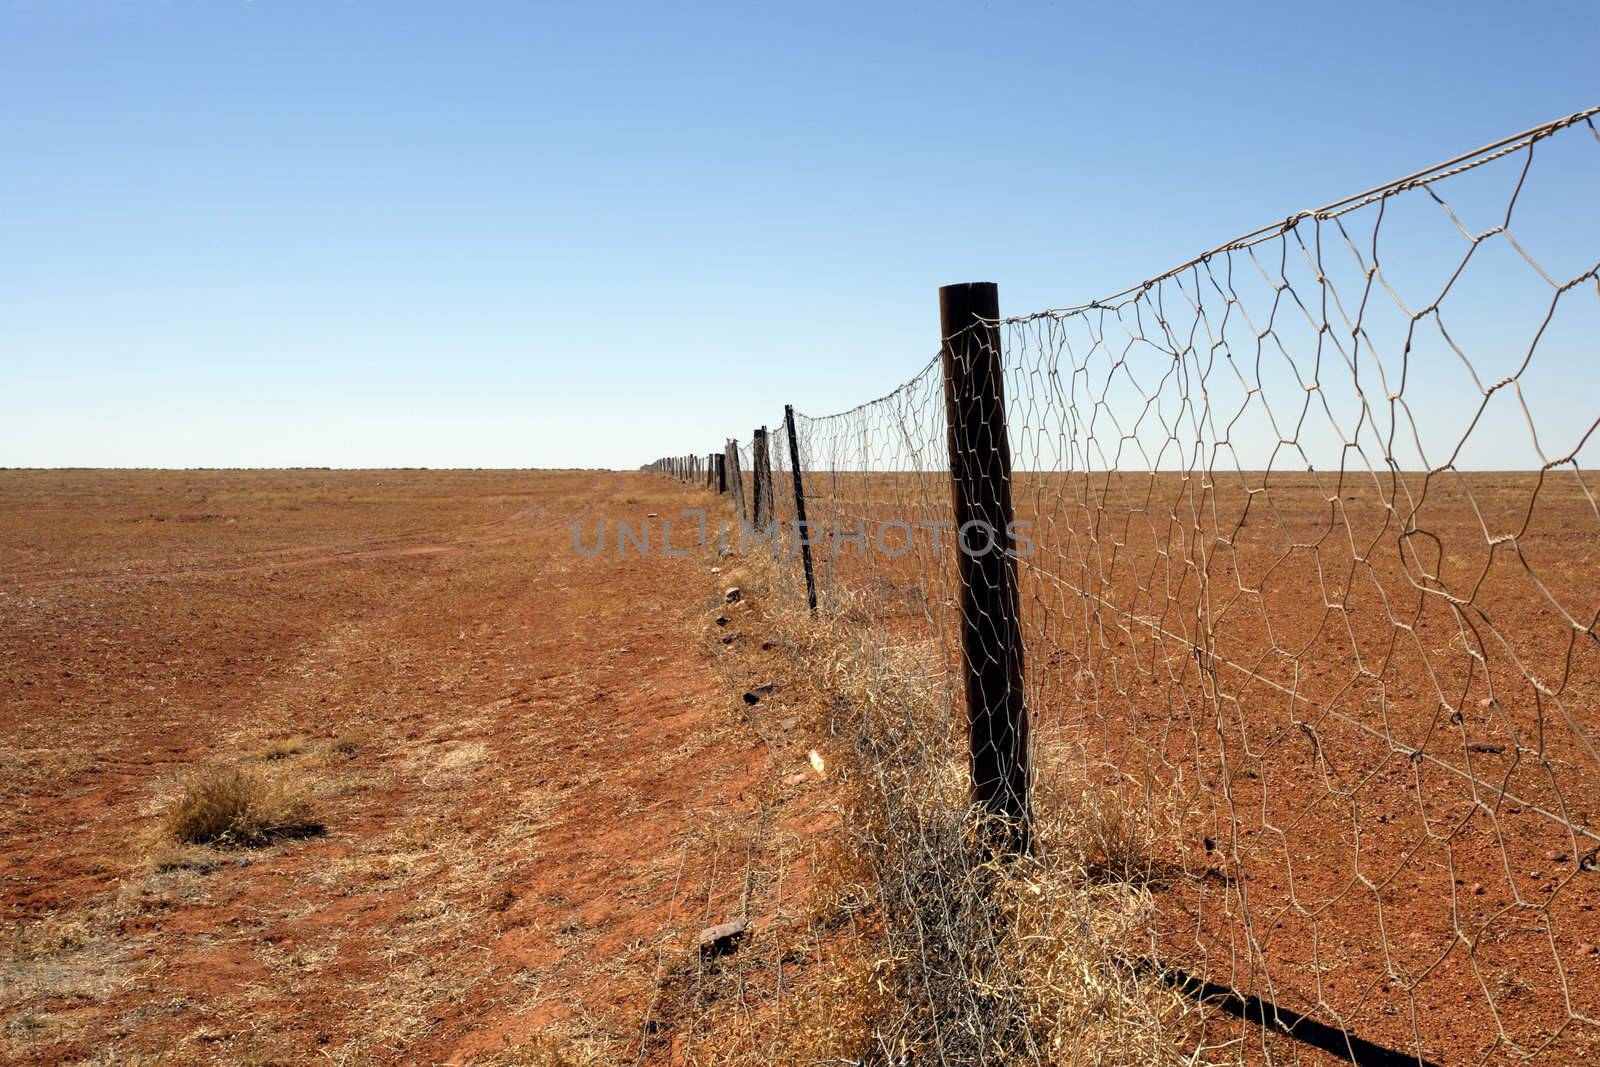 The Dingo fence in the Australian Outback.  Fence is 9600 km long and spans the entire country, keeping the dingoes out of the south where sheep graze.
